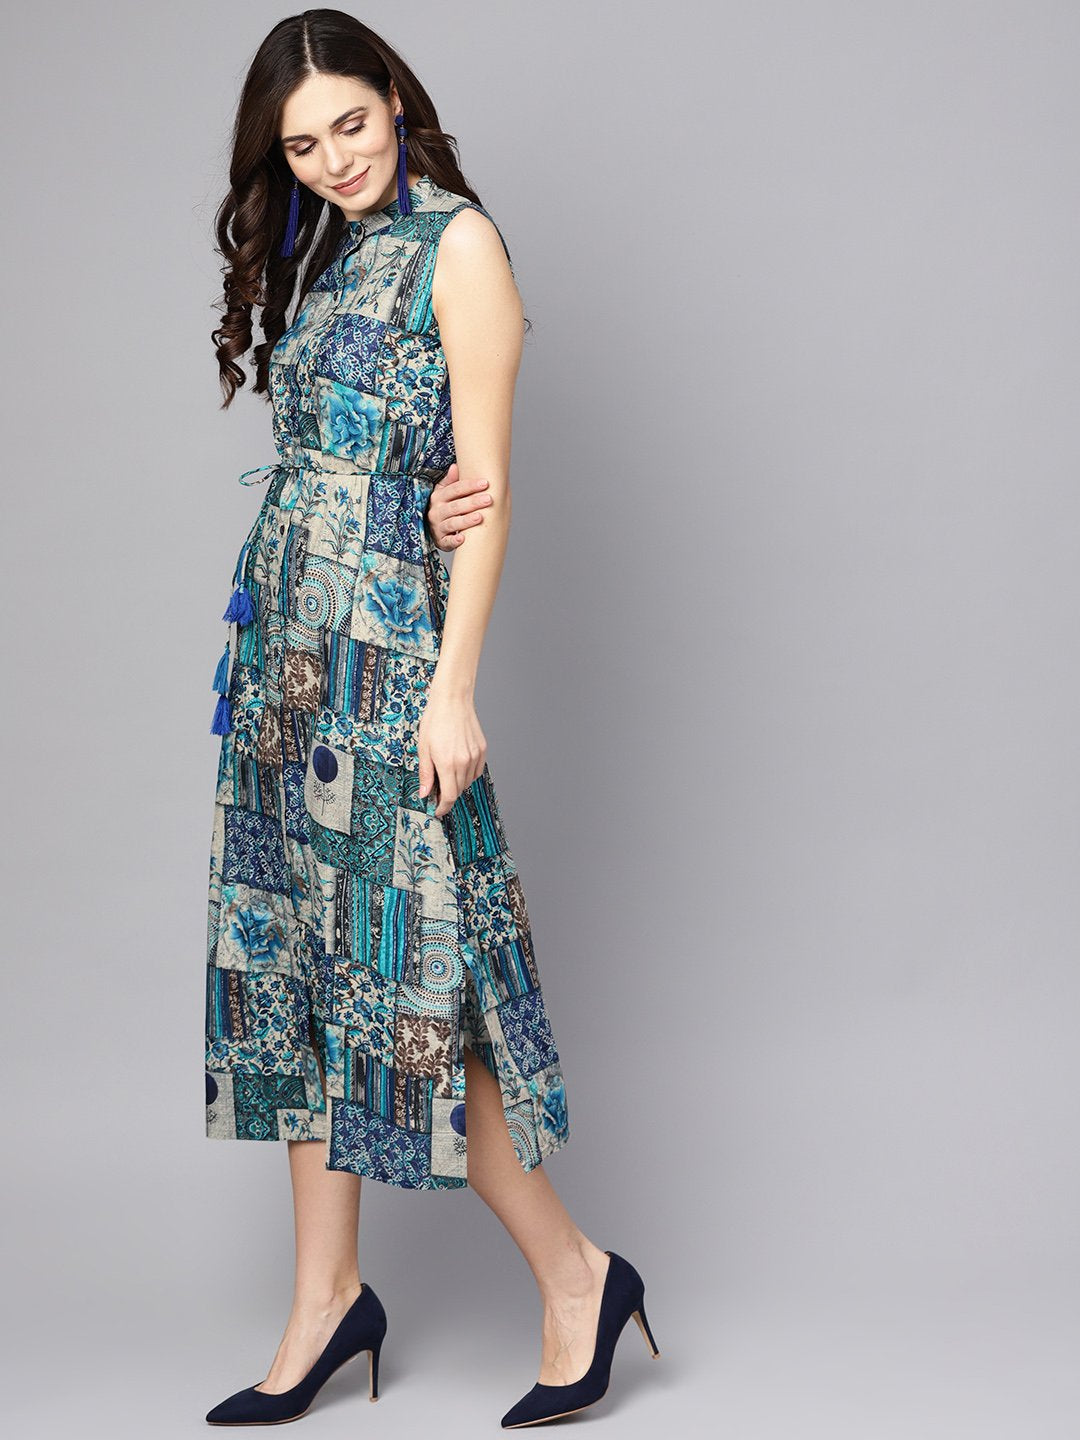 Women's Multi Colored Ankle Length Dress With Madarin Collar - Nayo Clothing